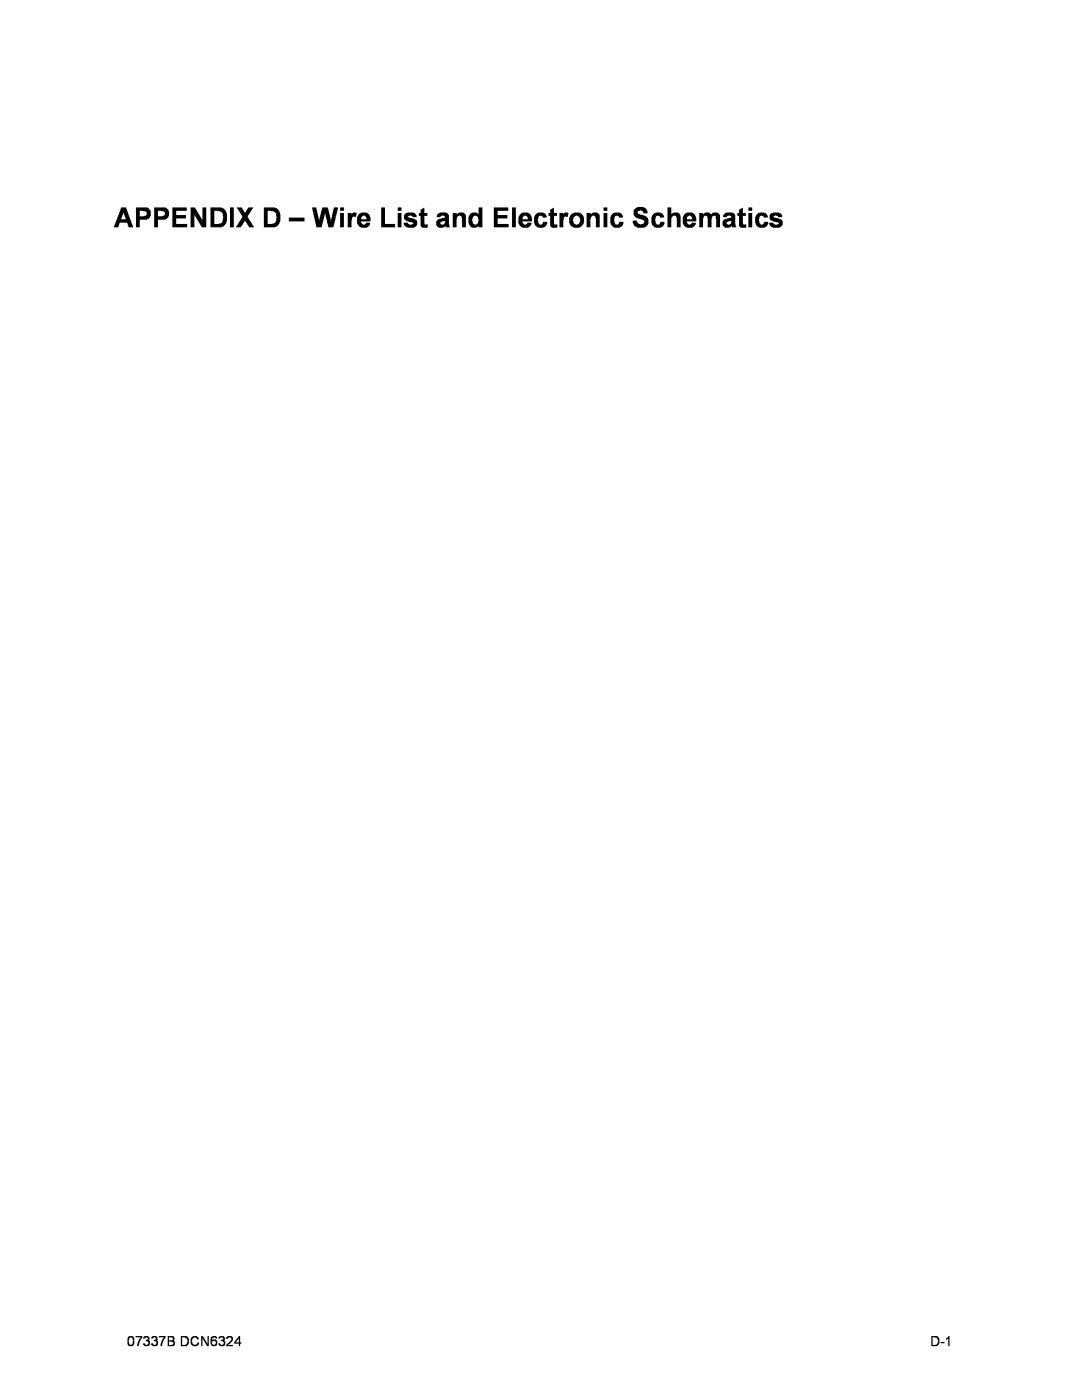 Teledyne T265 manual APPENDIX D - Wire List and Electronic Schematics, 07337B DCN6324 